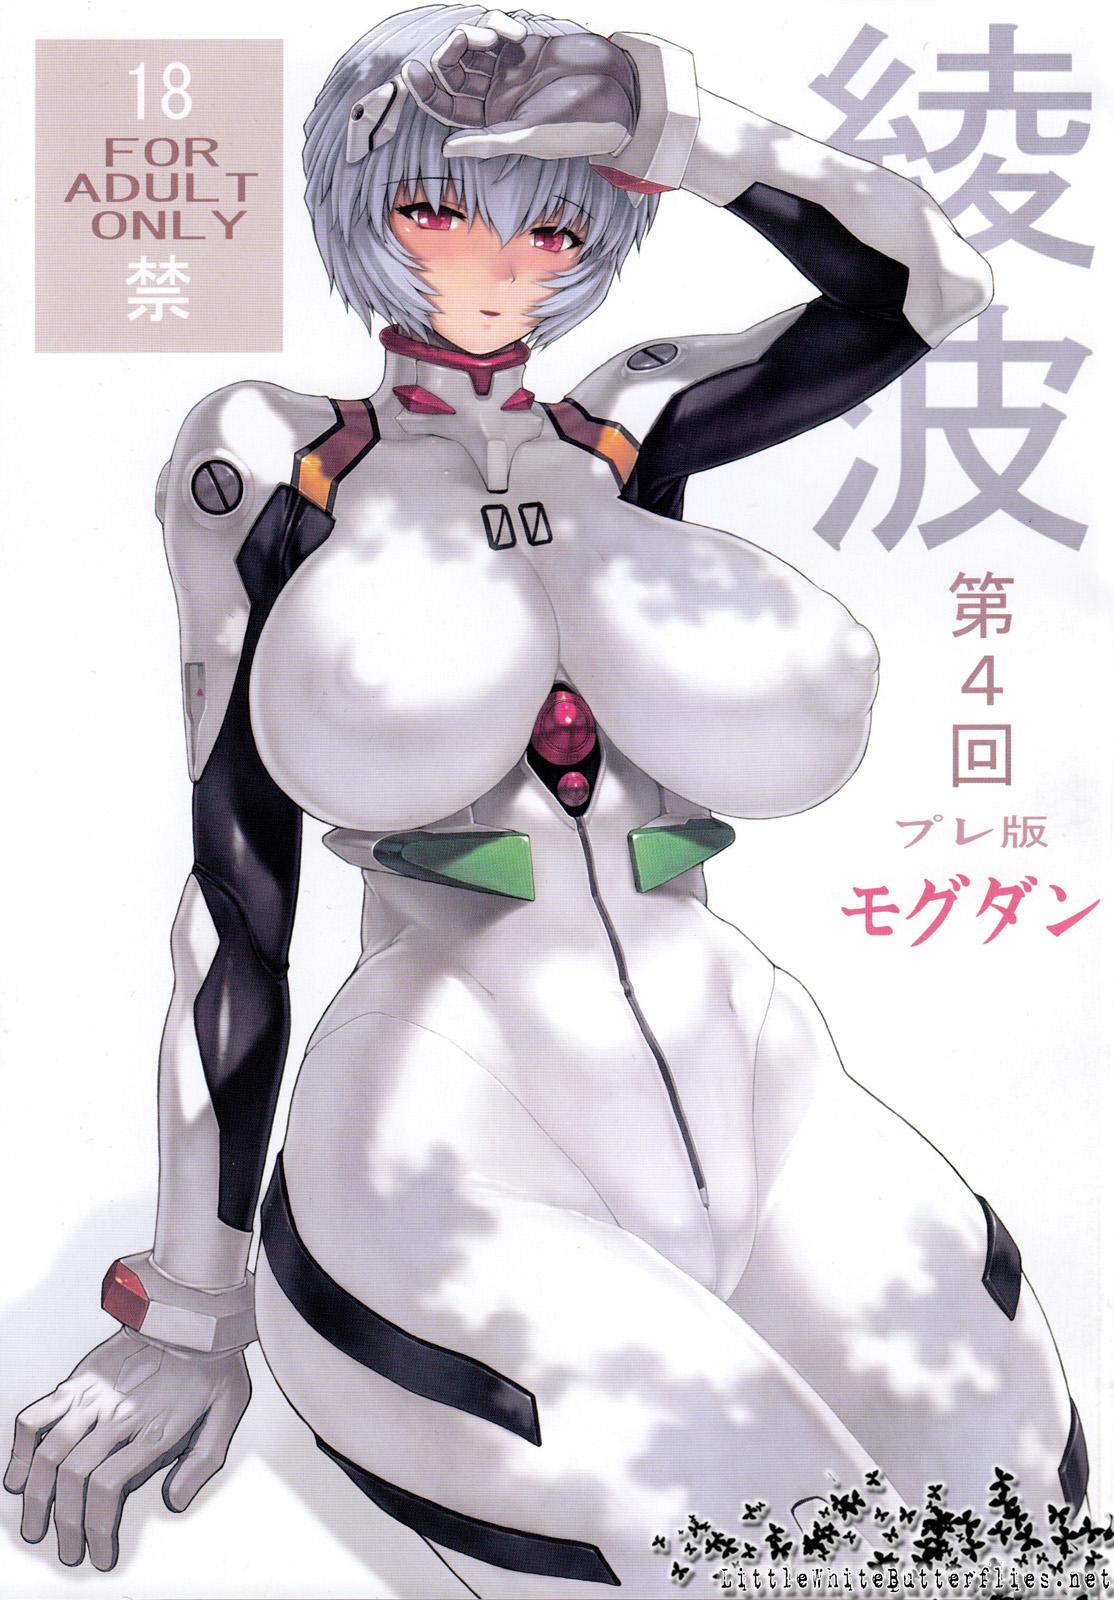 Ayanami 4 Preview Edition 0